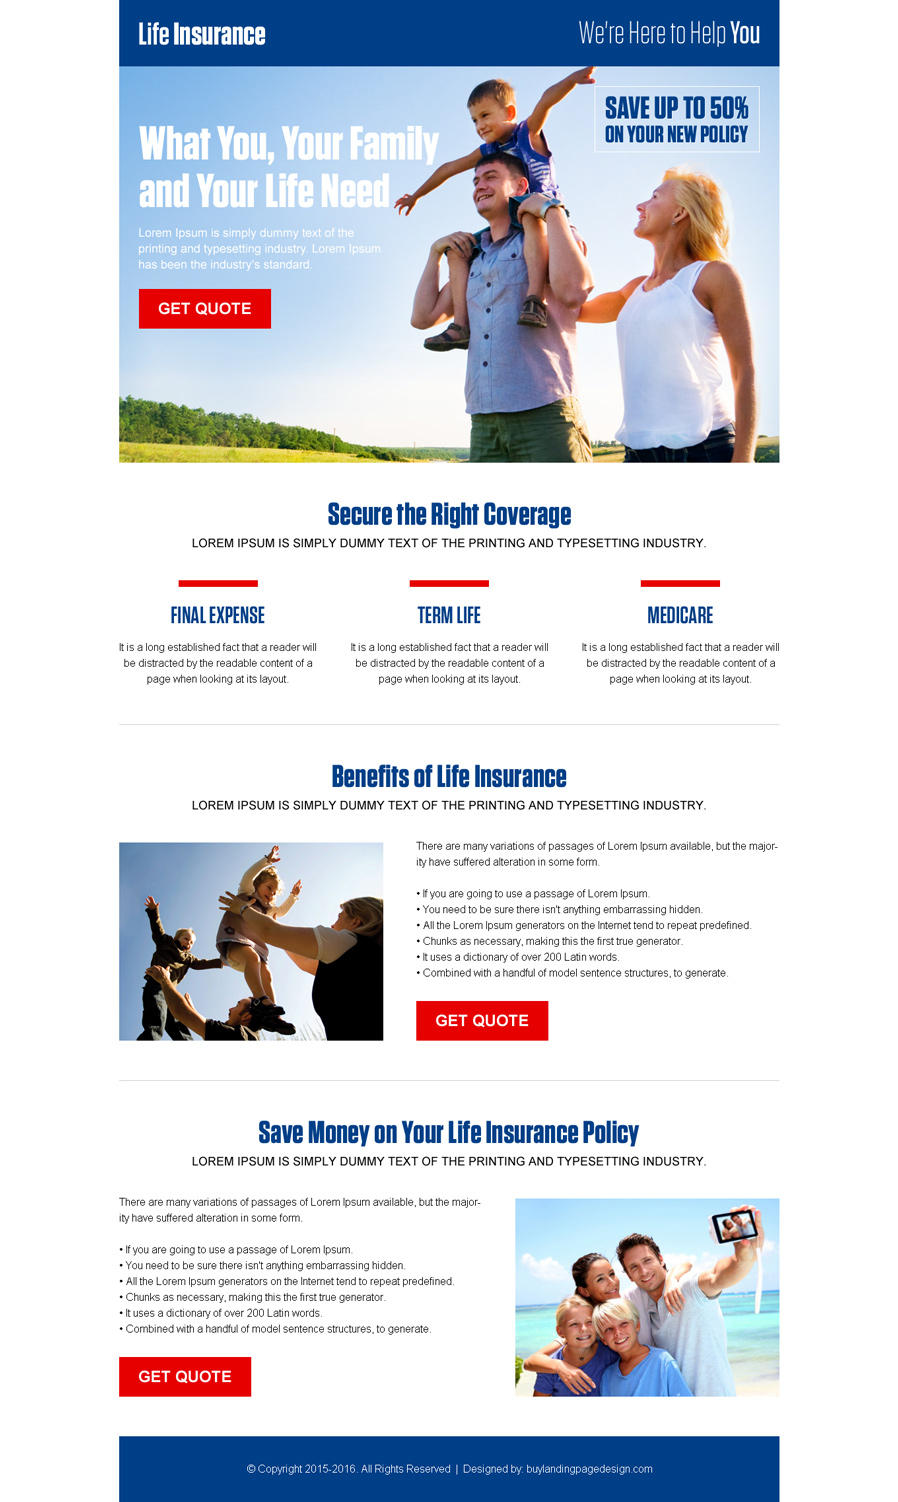 converting-life-insurance-free-quote-service-landing-page-design-template-005